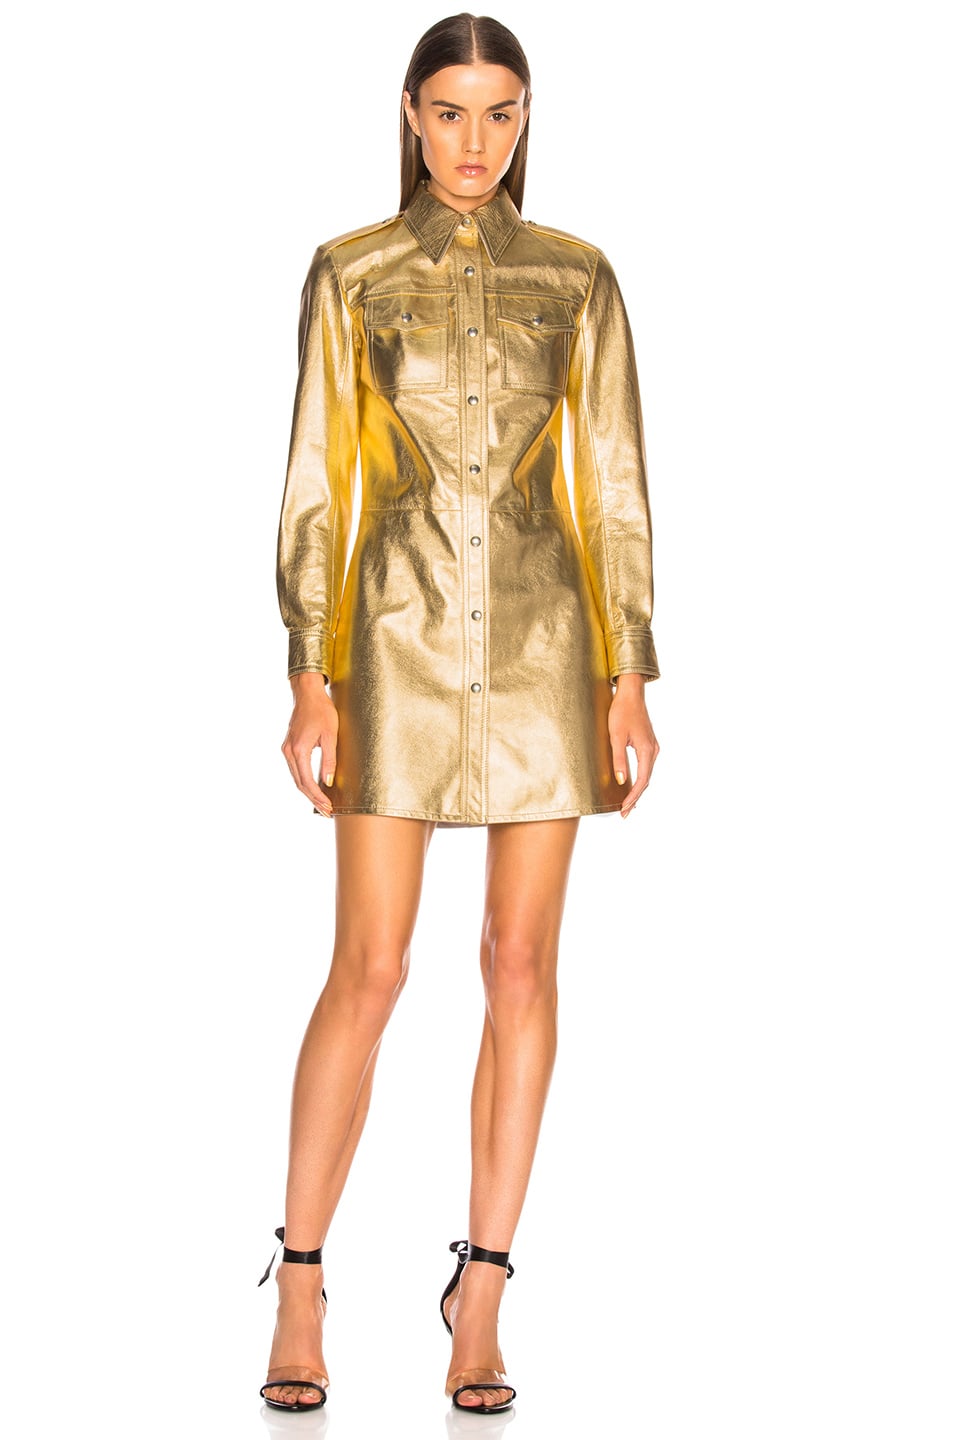 Calvin Klein Metallic Leather Western Shirt Dress in Gold | Selena Gomez's  Dress Is All About the Tiny Details — and There's a Wholllle Lot of 'Em |  POPSUGAR Fashion Photo 11